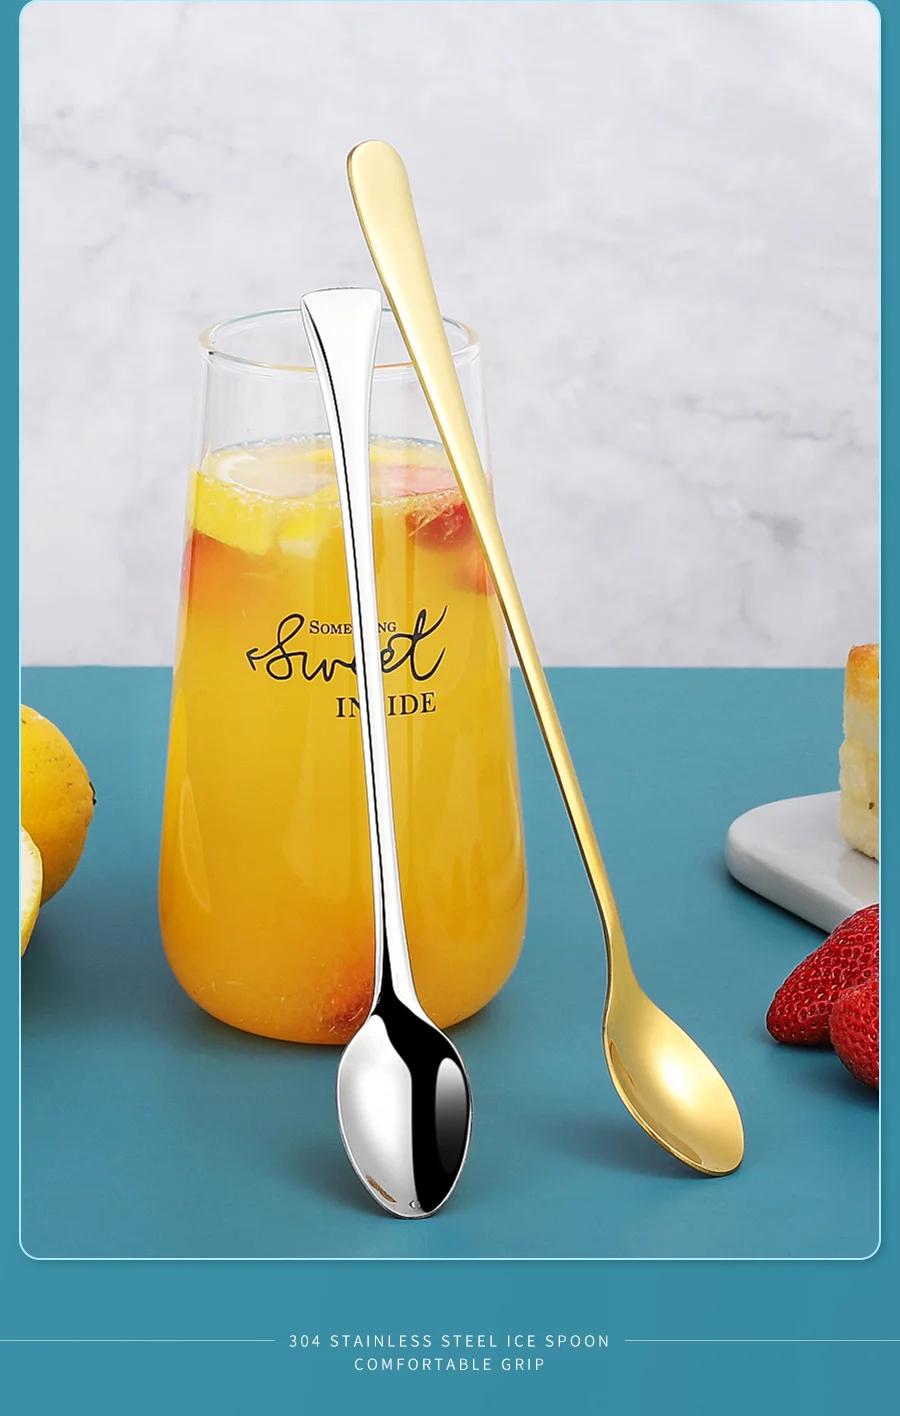 2PCS 17cm Stainless Steel Mixing Stirring Spoons for Iced Tea Coffee Milkshakes Drinks Cocktail Home Restaurant Bar Gold 